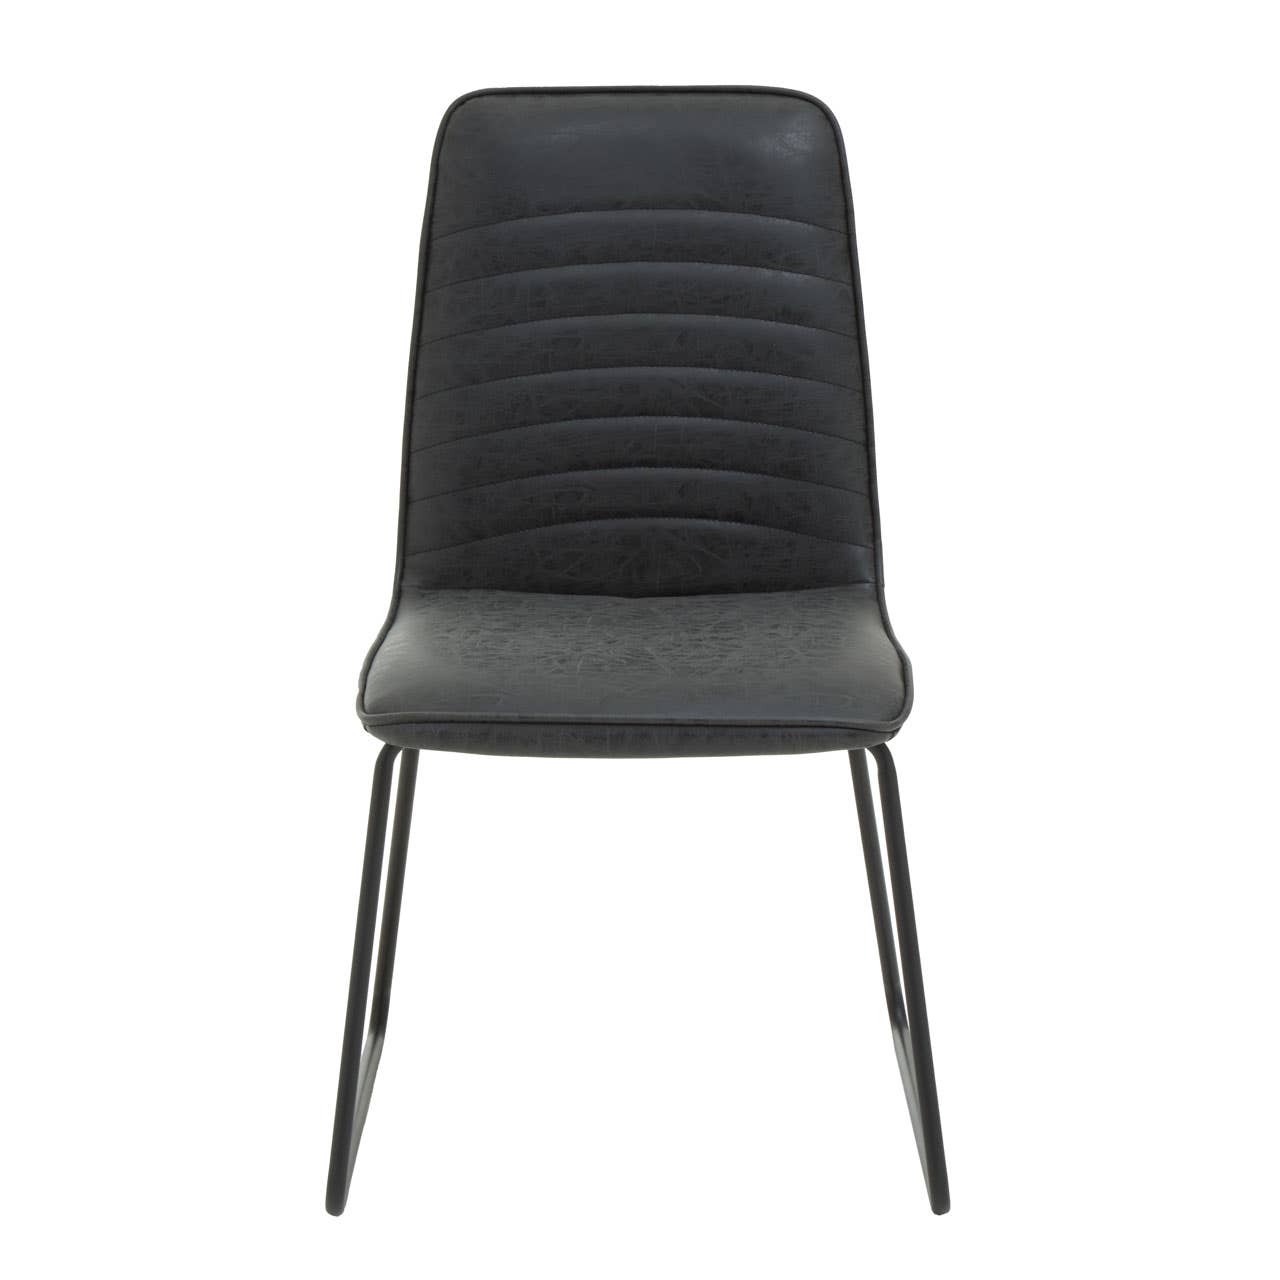 New Foundry Black Leather Effect Chair